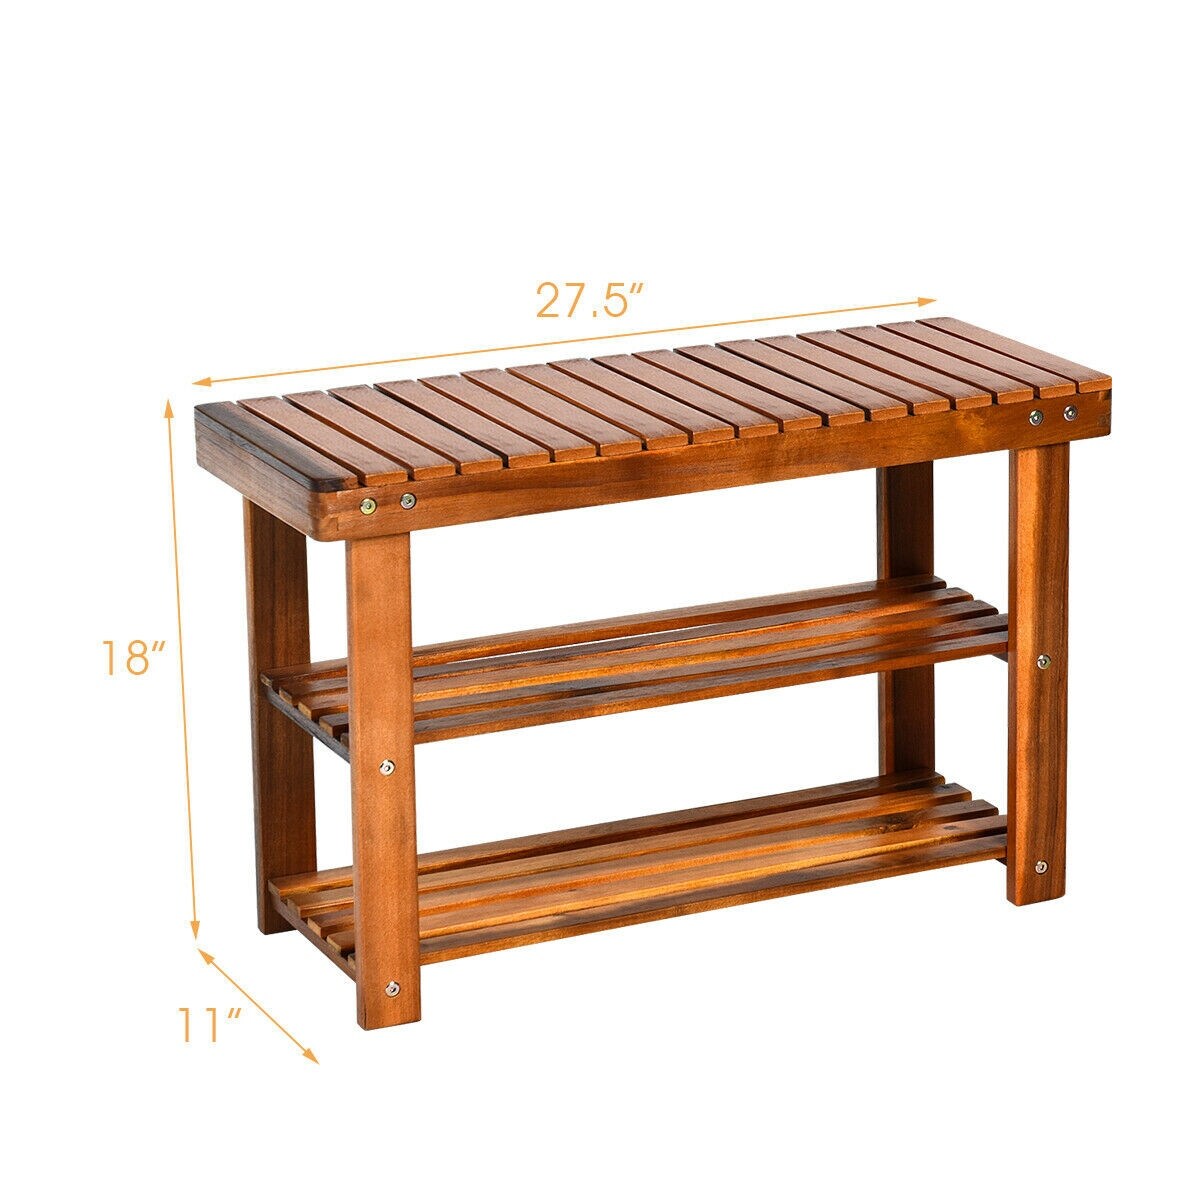 x 11.81 Sturdy Entryway Bench with Shoe Storage Rustic White Oak Shoe Bench 3-Tier Shoe Rack Bench with Mesh Shelves 28.74 Holds up to 220 lbs x 17.72 D H W